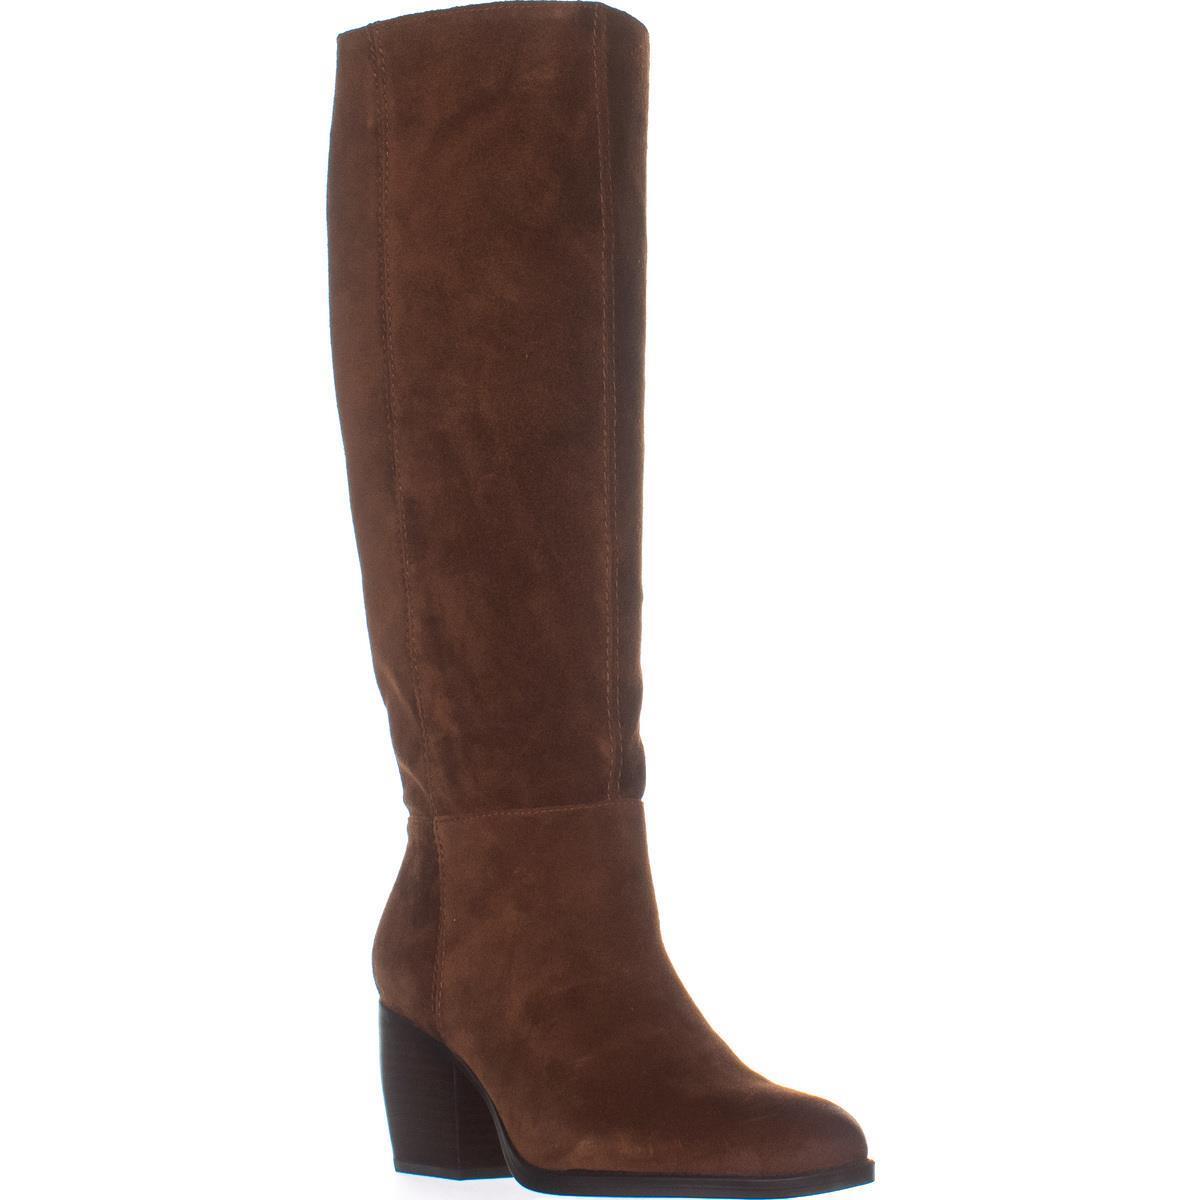 Womens naturalizer Fae Knee High Boots, Saddle Tan Suede, 9.5 W US ...